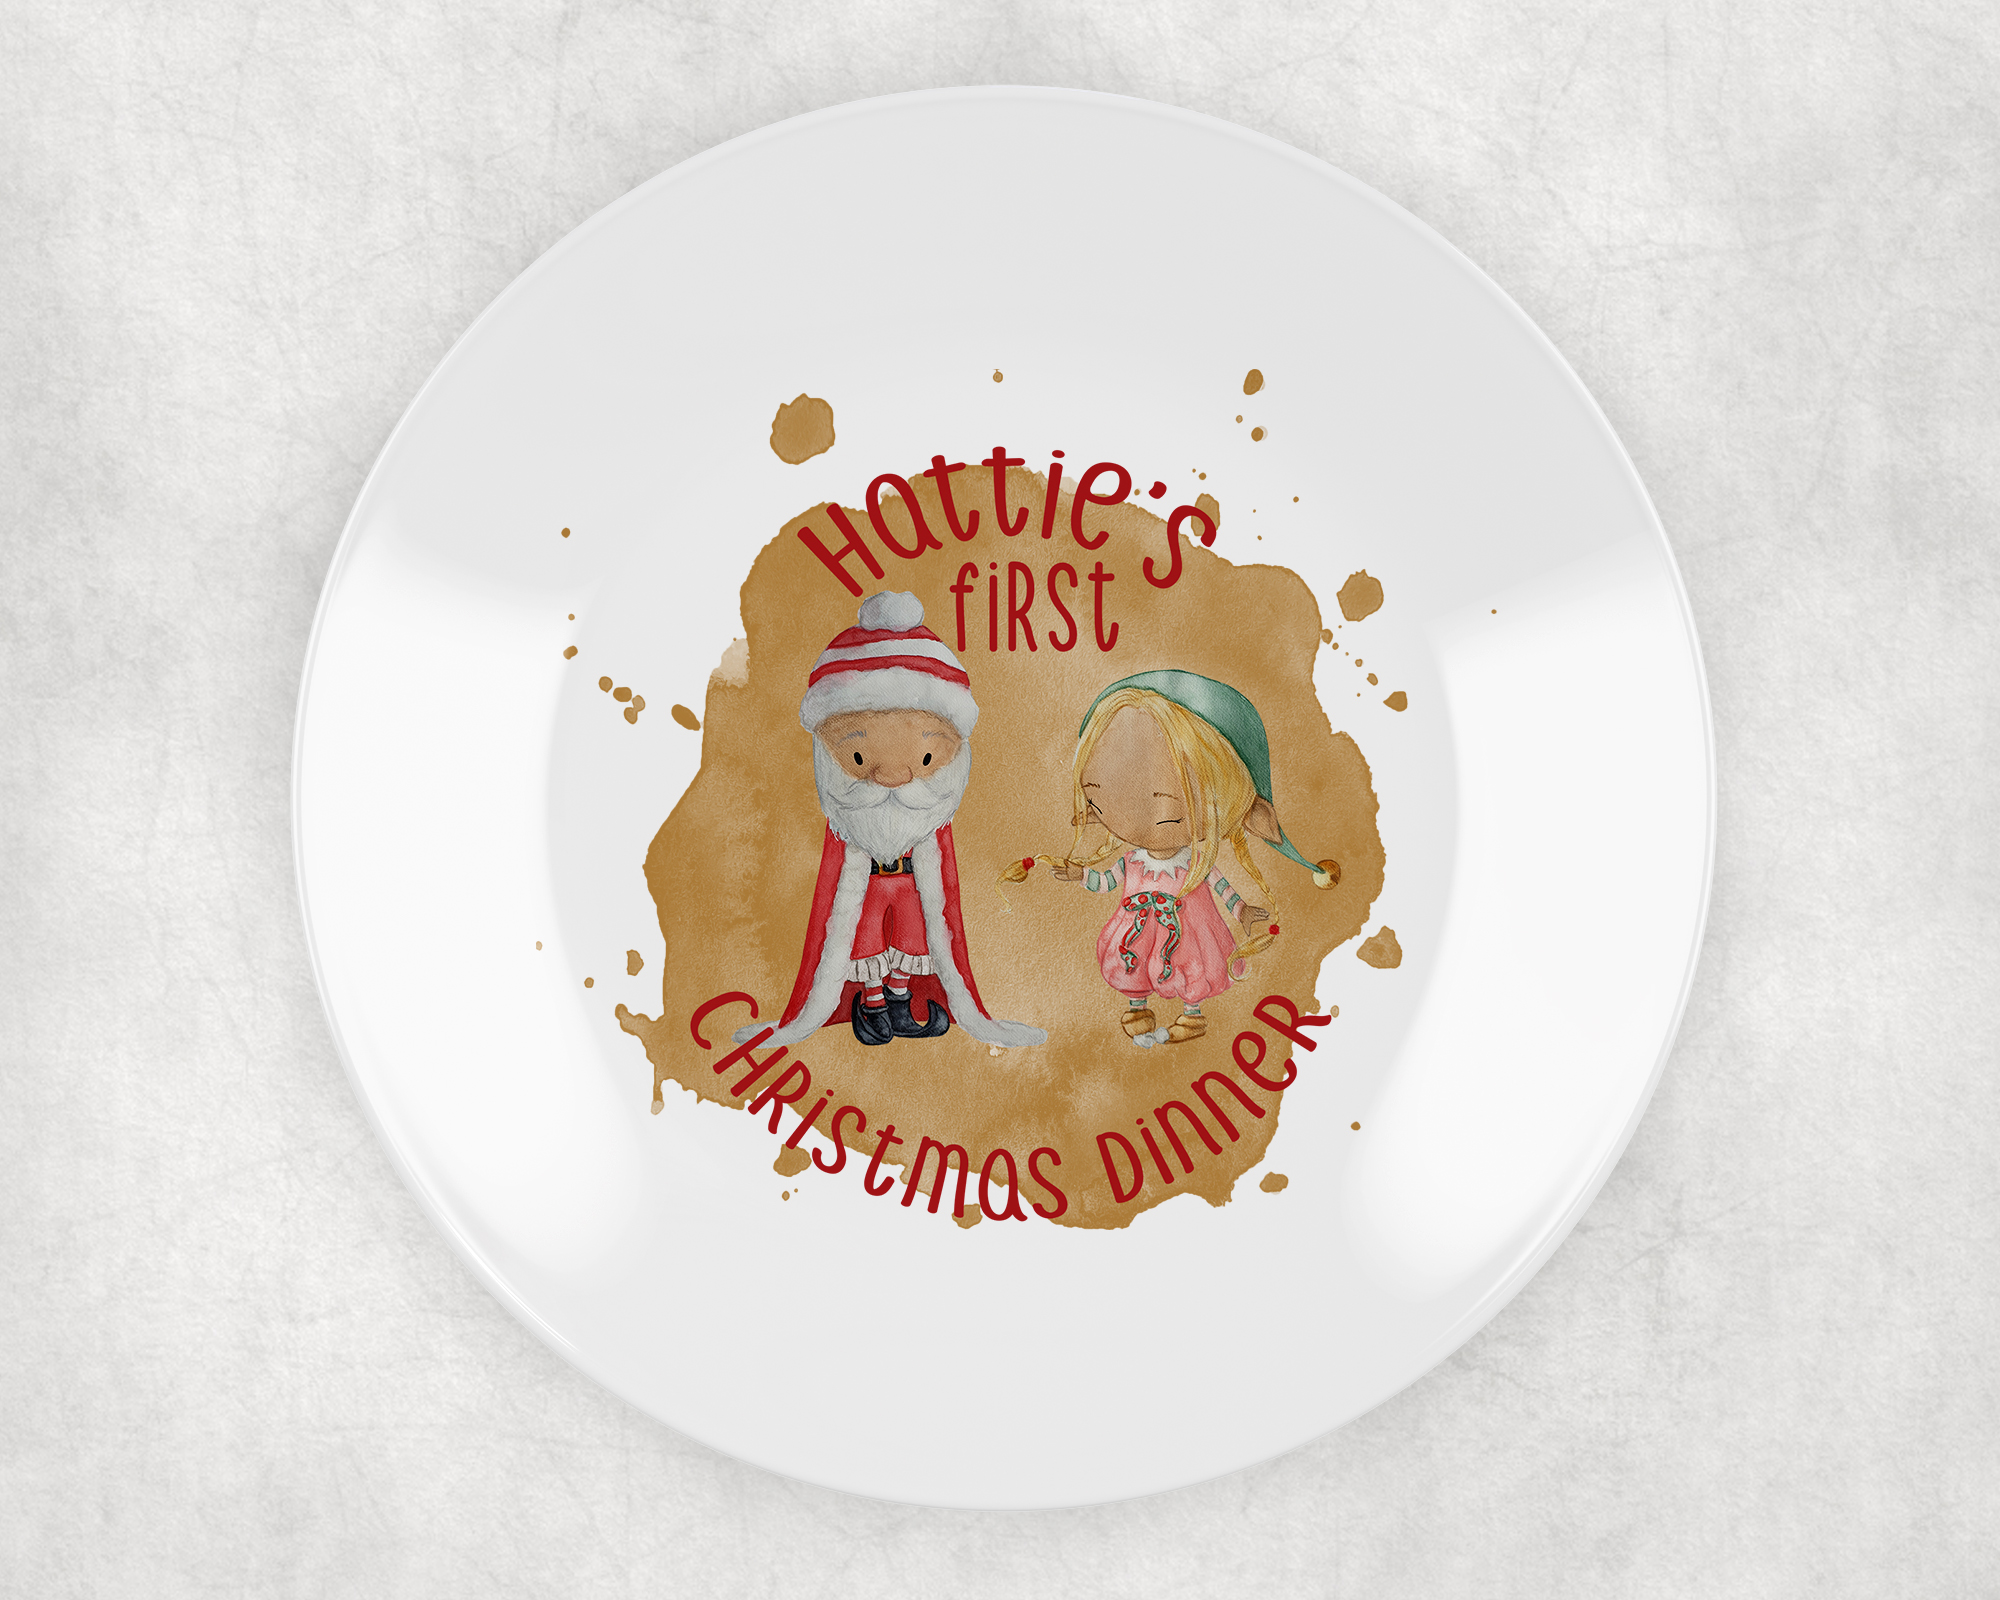 my first christmas plate personalised with santa and elf. ideal plastic non breakable plate. santa girl elf blond hair gold background